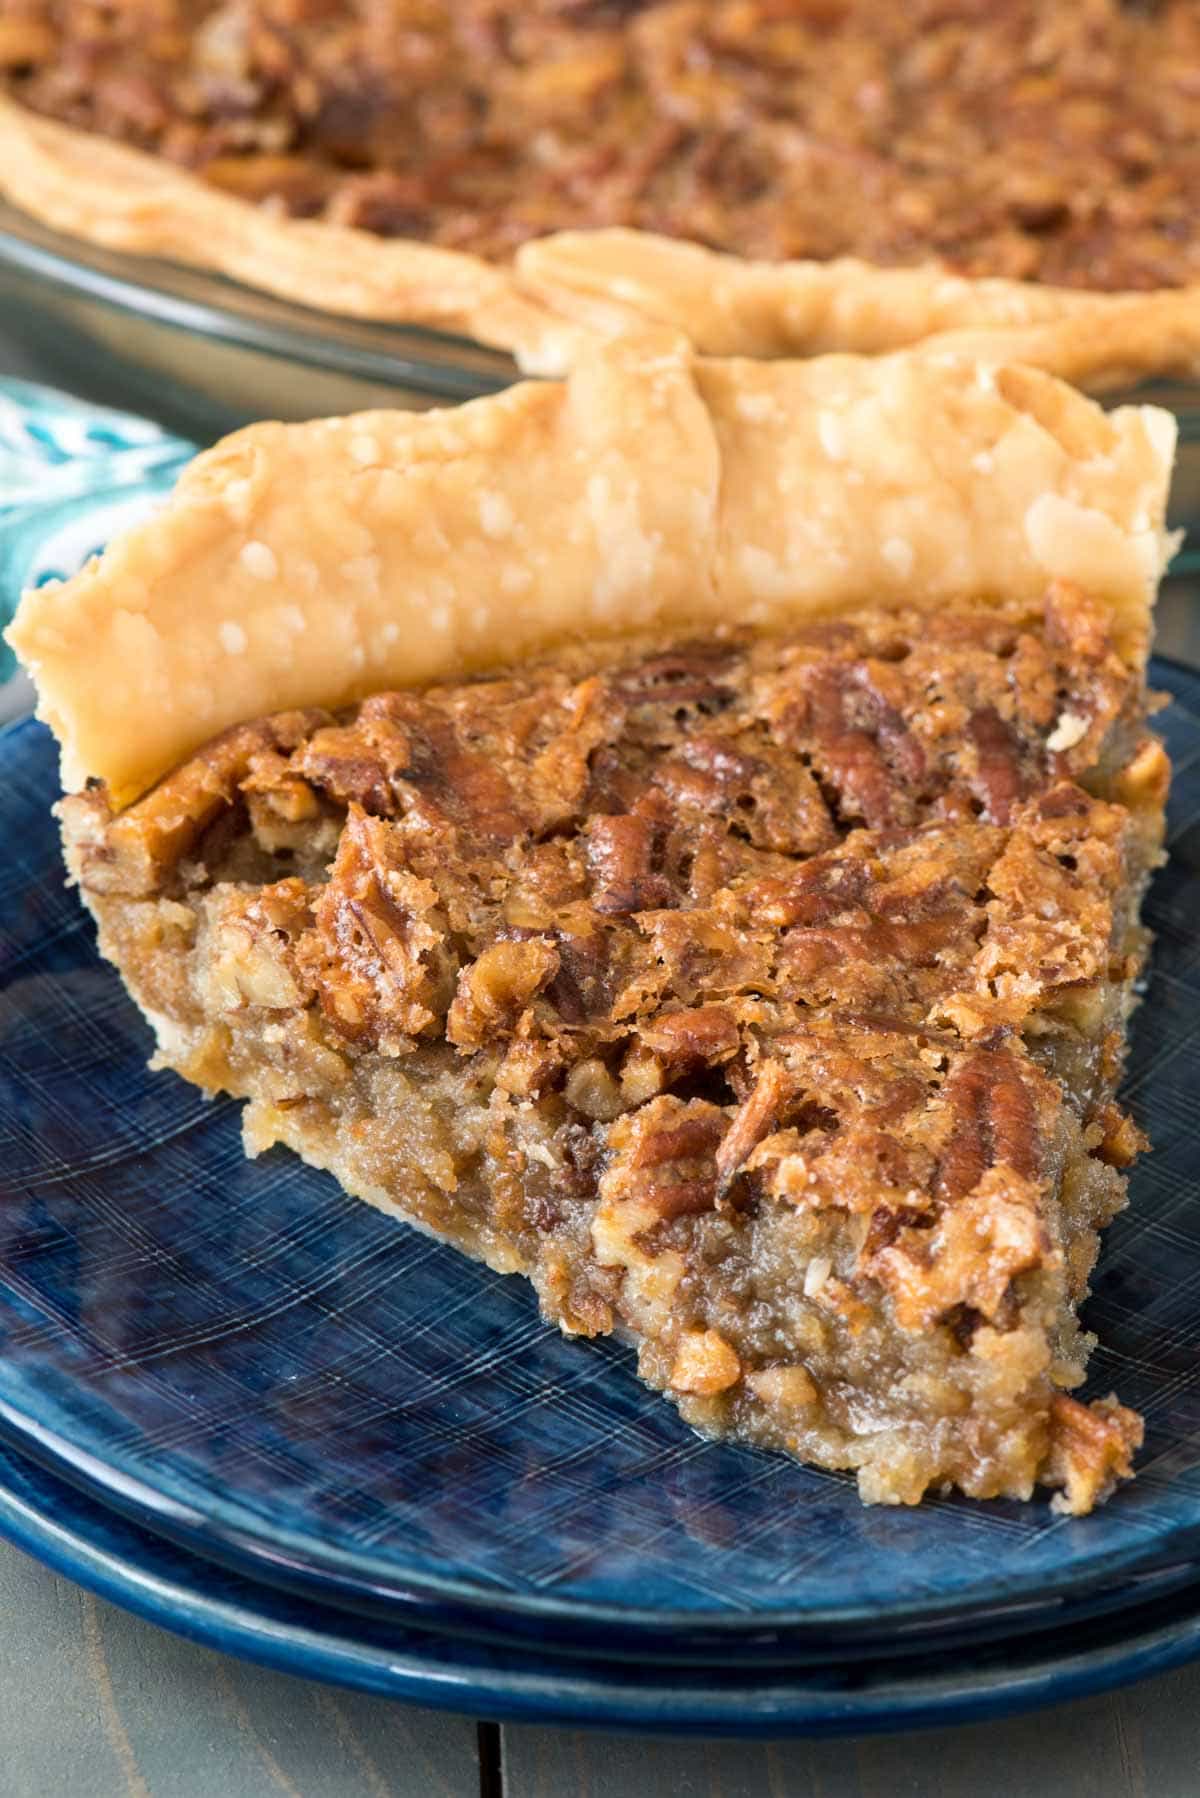 Brown Sugar Pecan Pie - this easy and fast pecan pie recipe has no corn syrup and is FULL of brown sugar. It's our family favorite and disappears in minutes every time I make it!